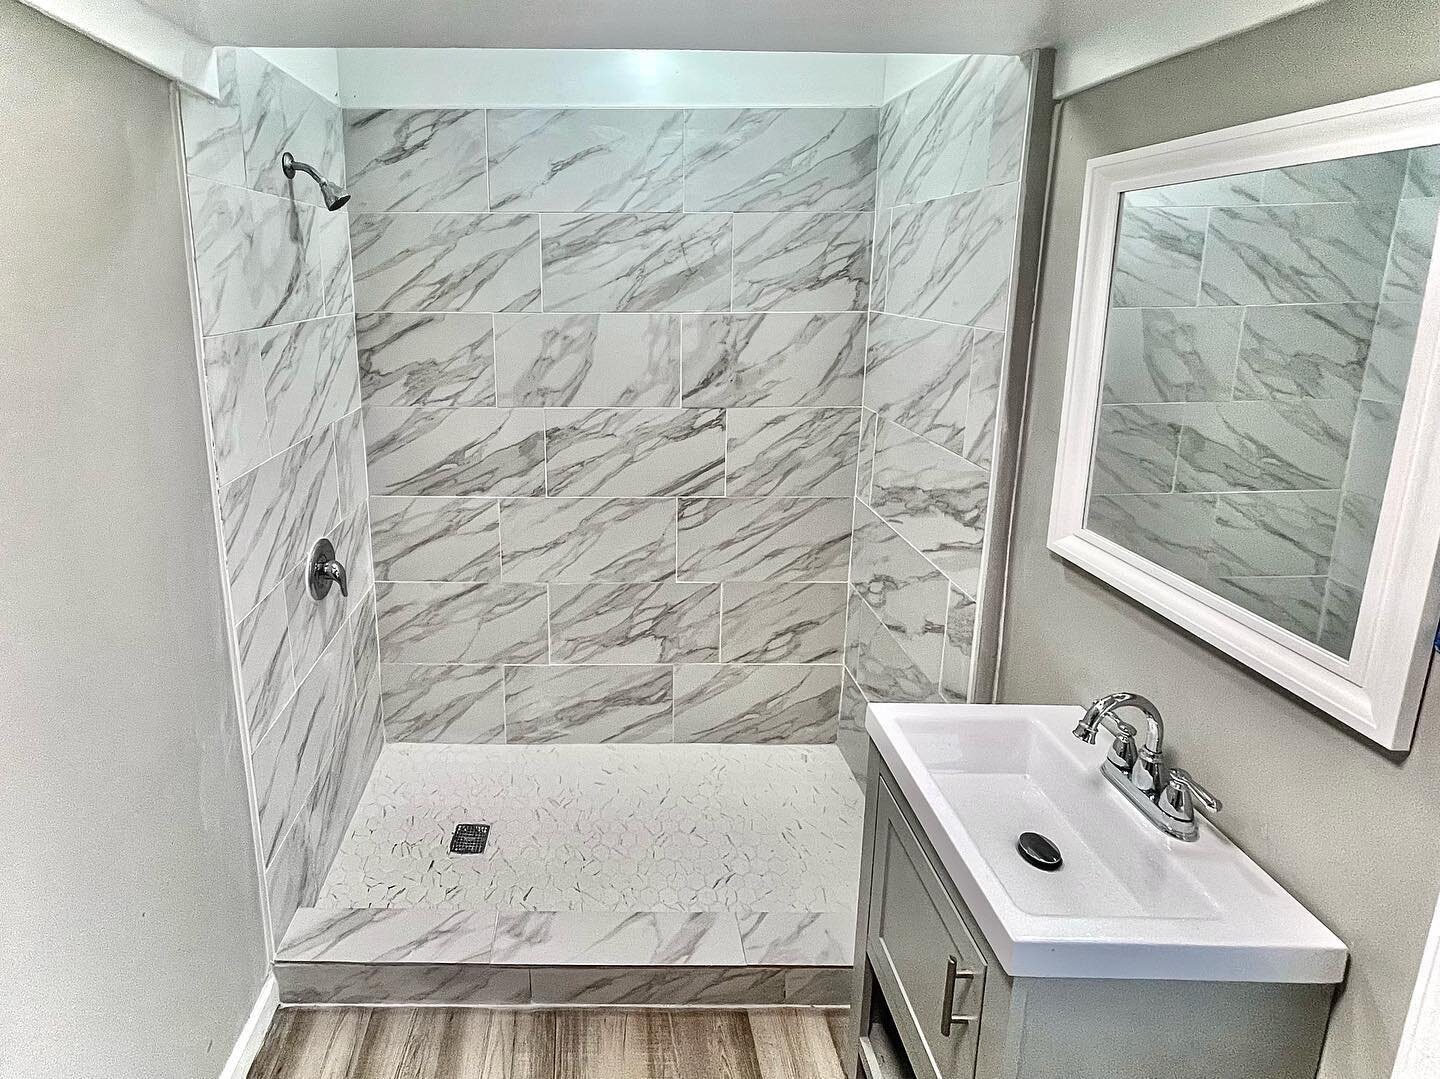 Updated bathroom in one of our new apartments in Sparrows Point ❄️

#RealEstate #House #Home #Apartment #Residence #Bathroom #Design #Tile #ShowerDesign #RentalProperty #Renovation #ForRent #LiveHere